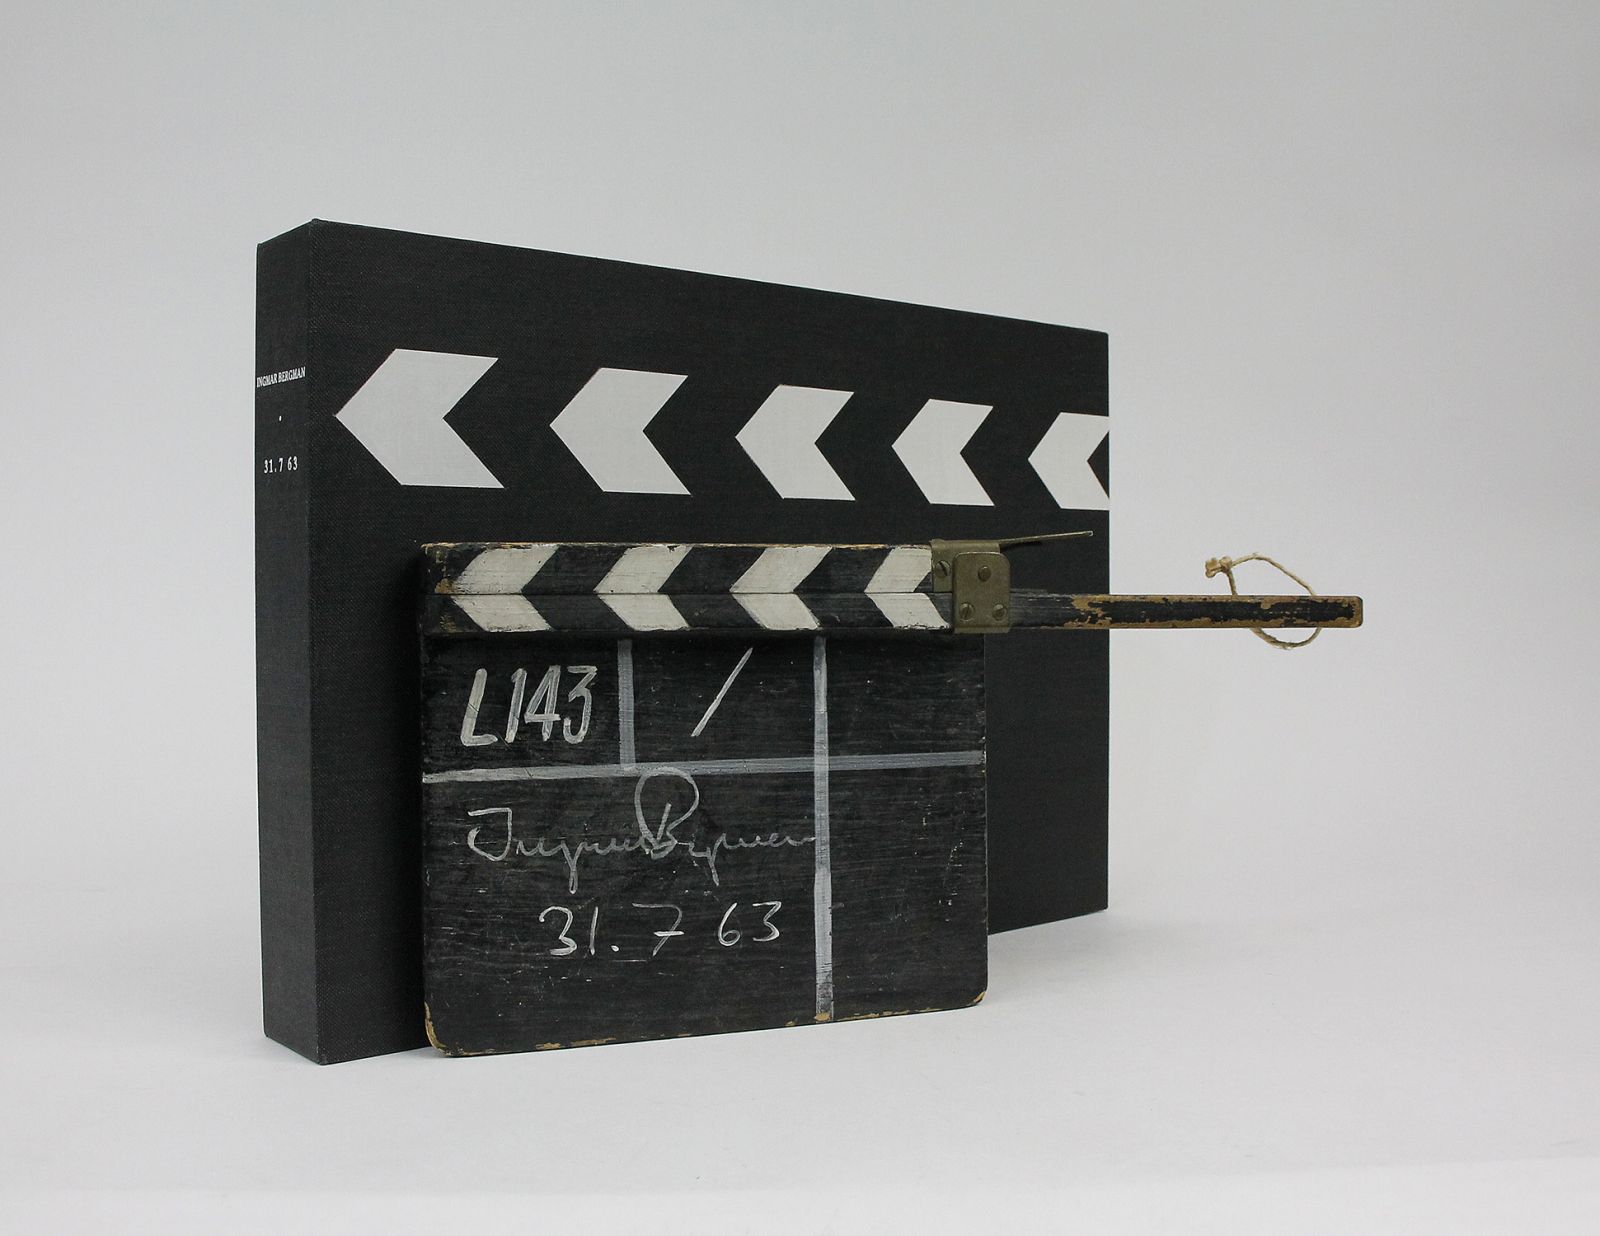 ORIGINAL SIGNED AND DATED CLAPPER BOARD USED IN THE PRODUCTION OF 'TYSTNADEN' [THE SILENCE] -  image 1